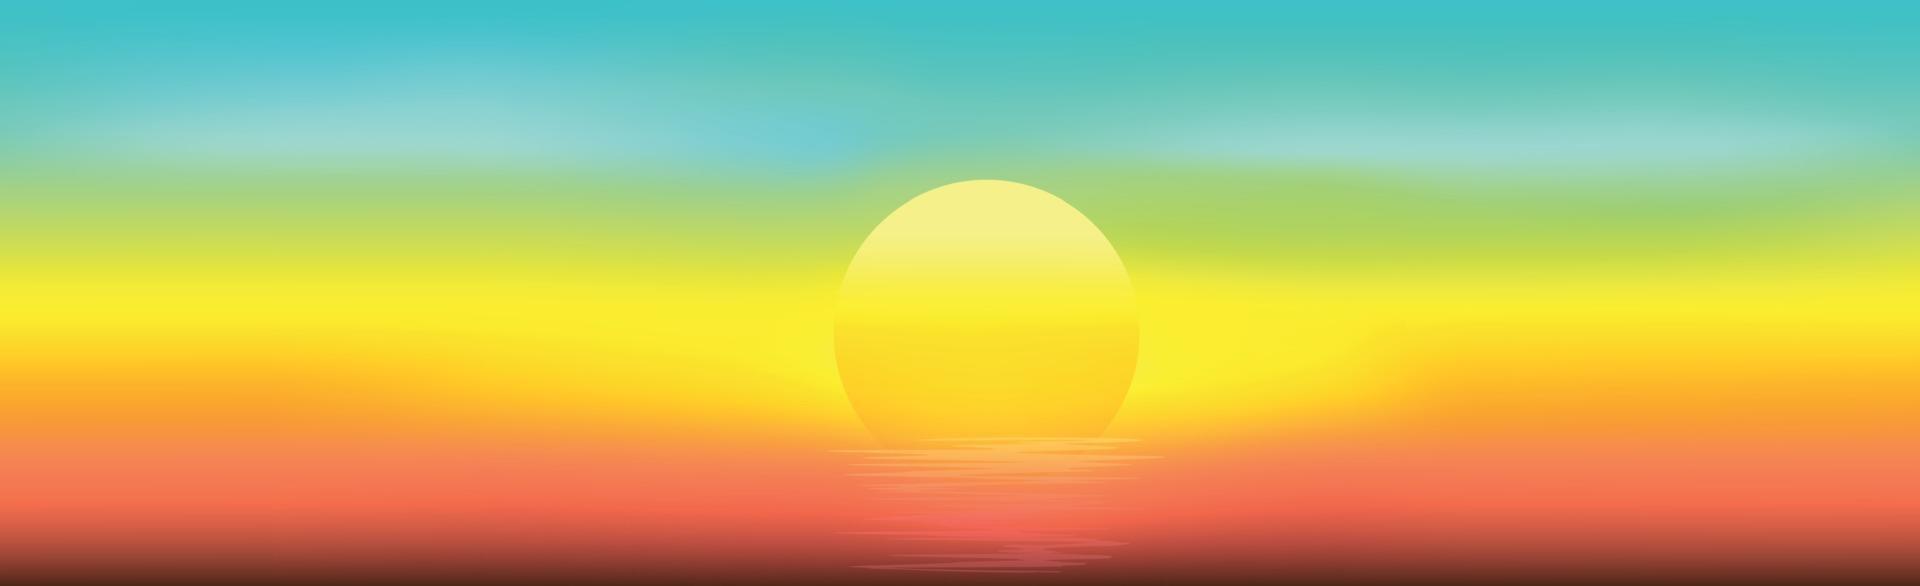 Panorama of sunset and glare on the water - illustration vector